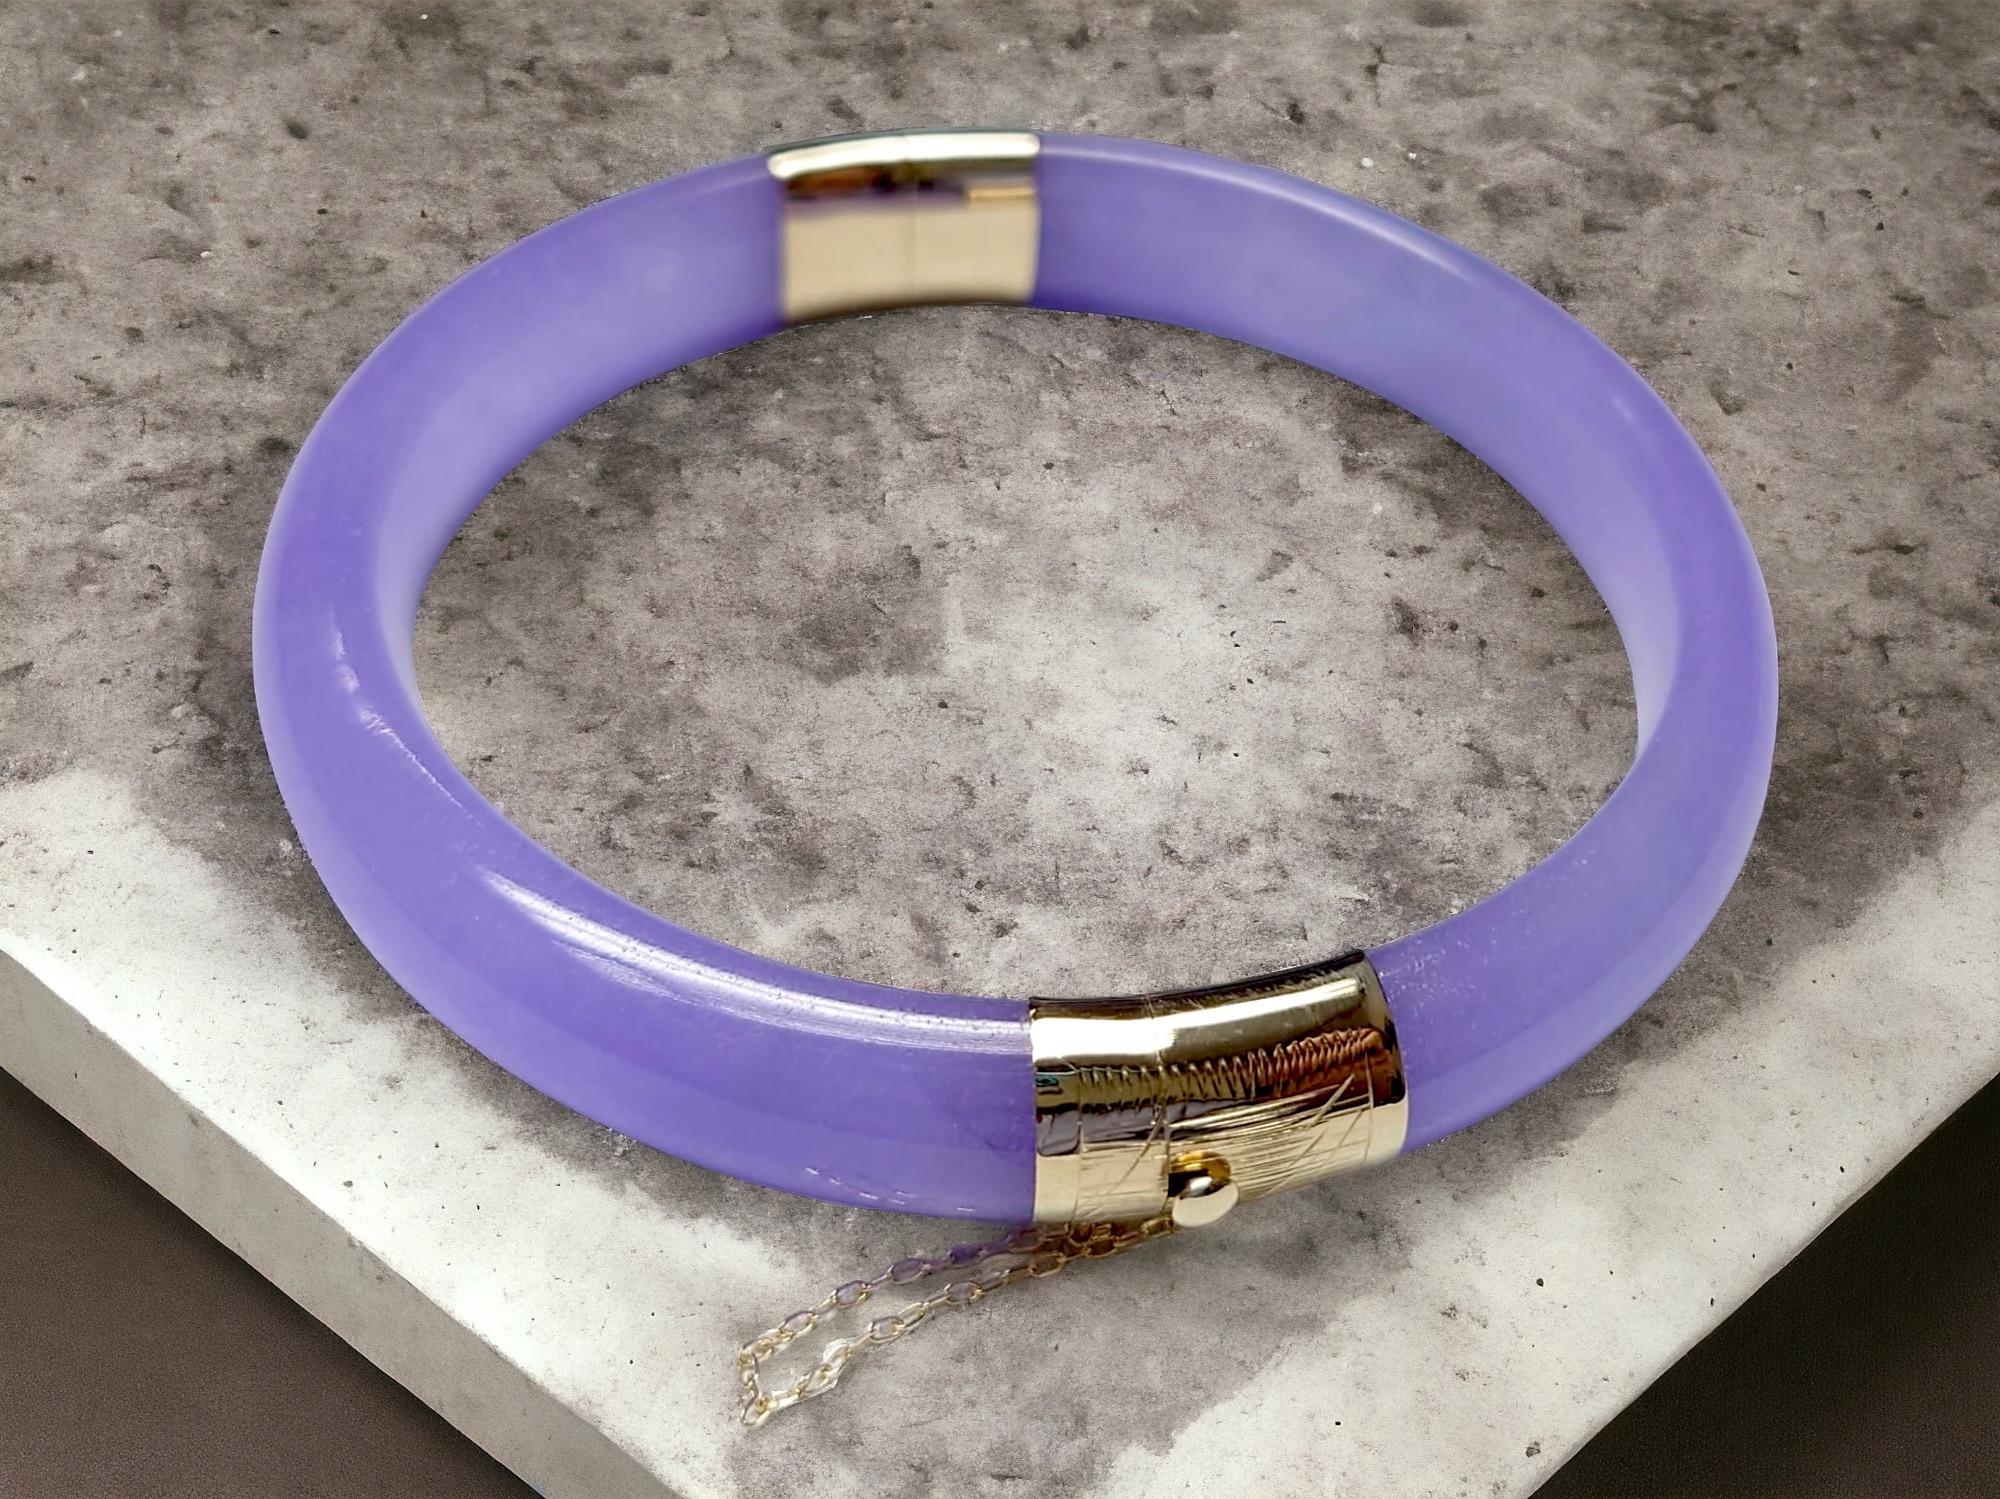 Viceroy's Circular Lavender Jade Bangle Bracelet (with 14K Yellow Gold) For Sale 7